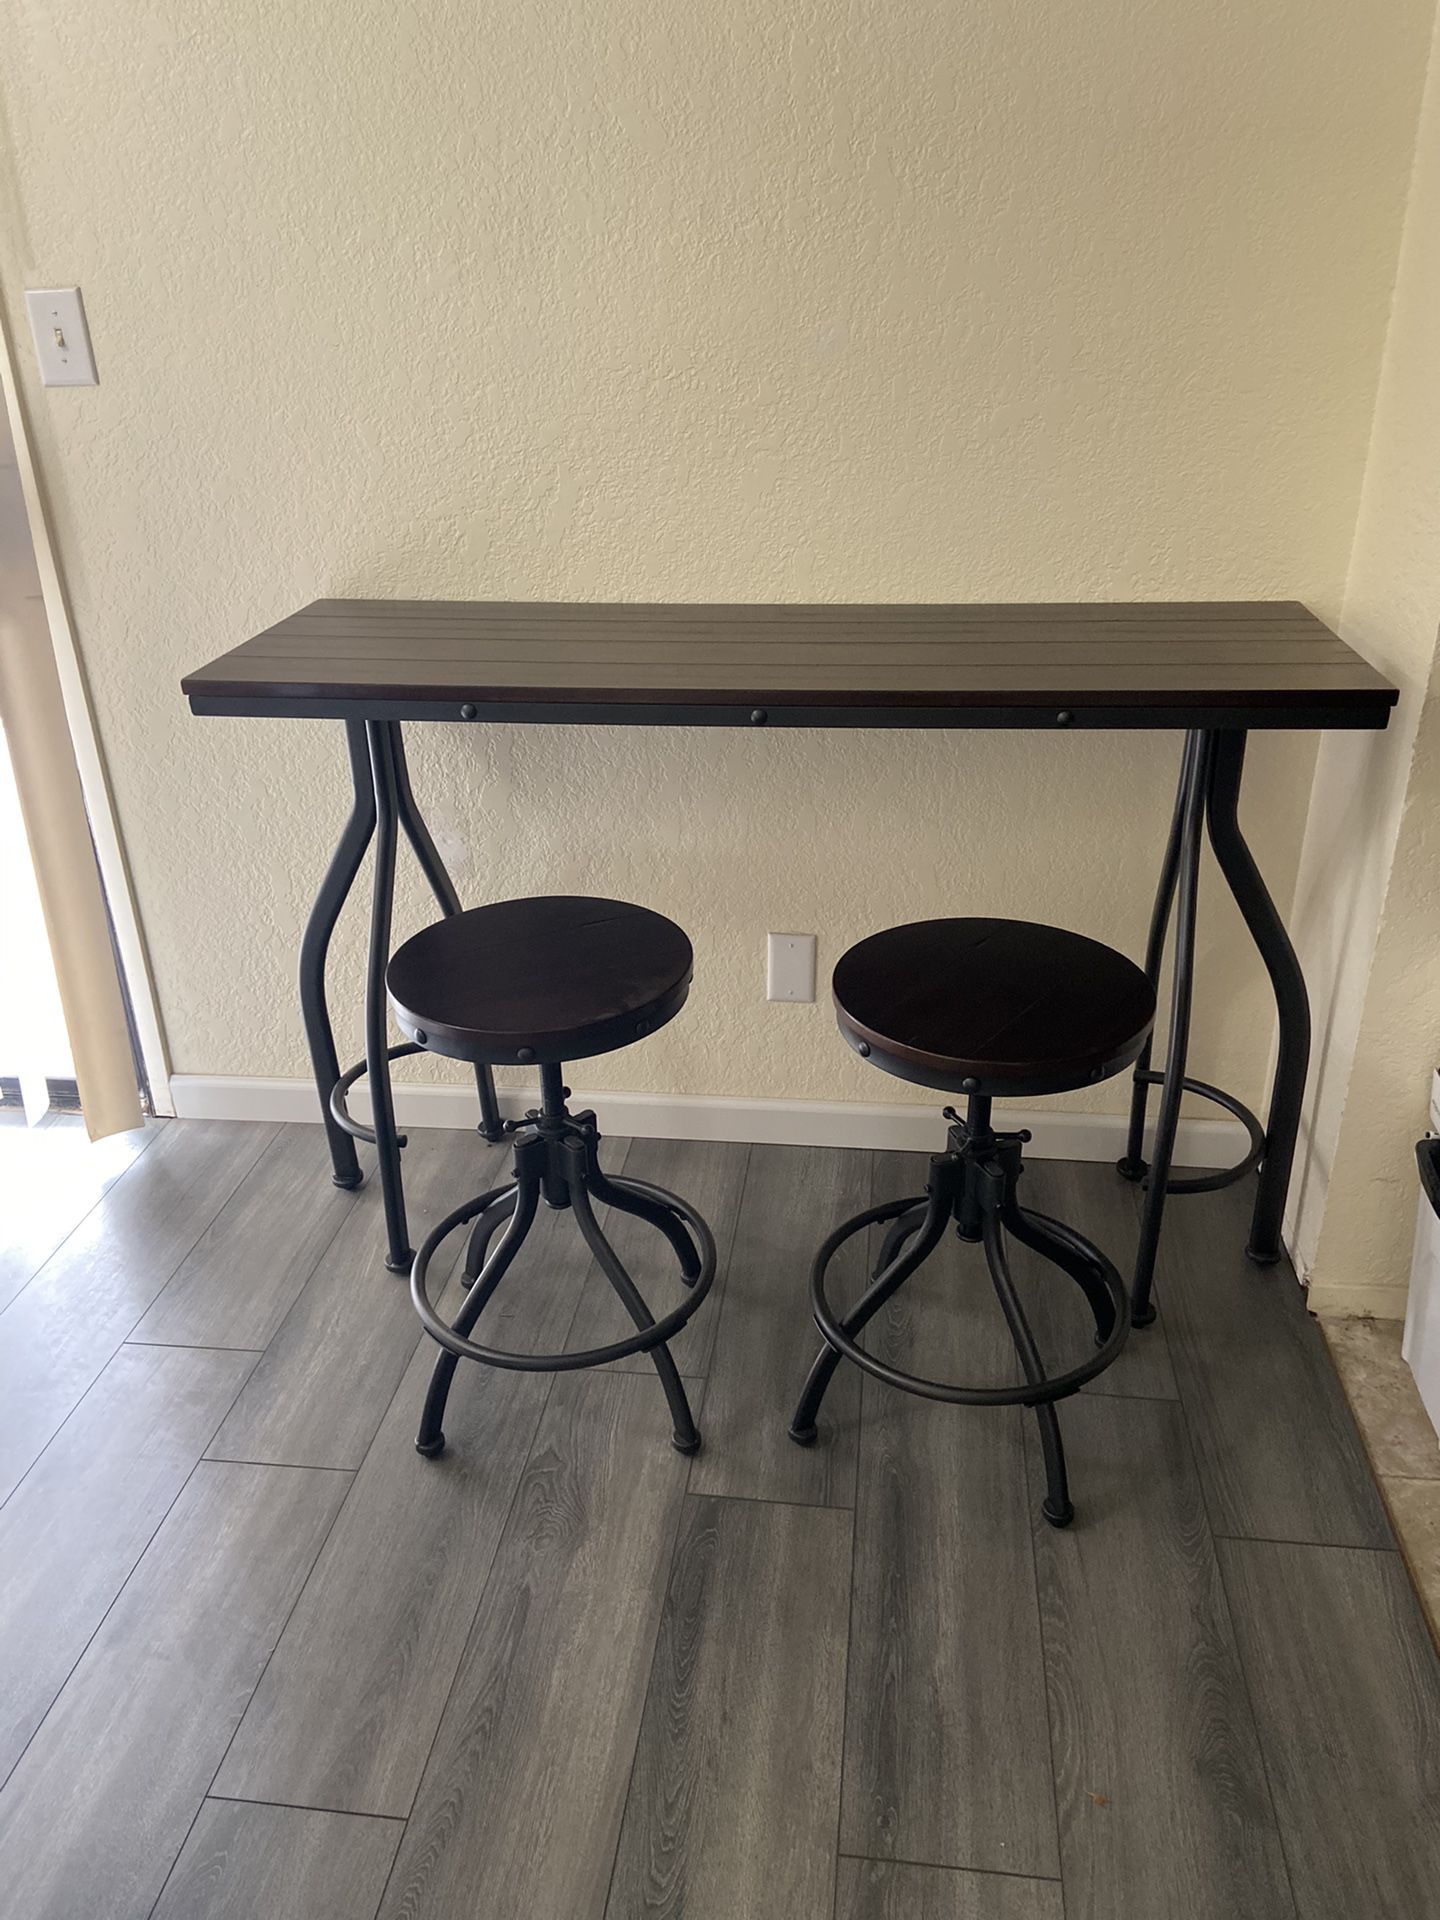 Bar table with stools